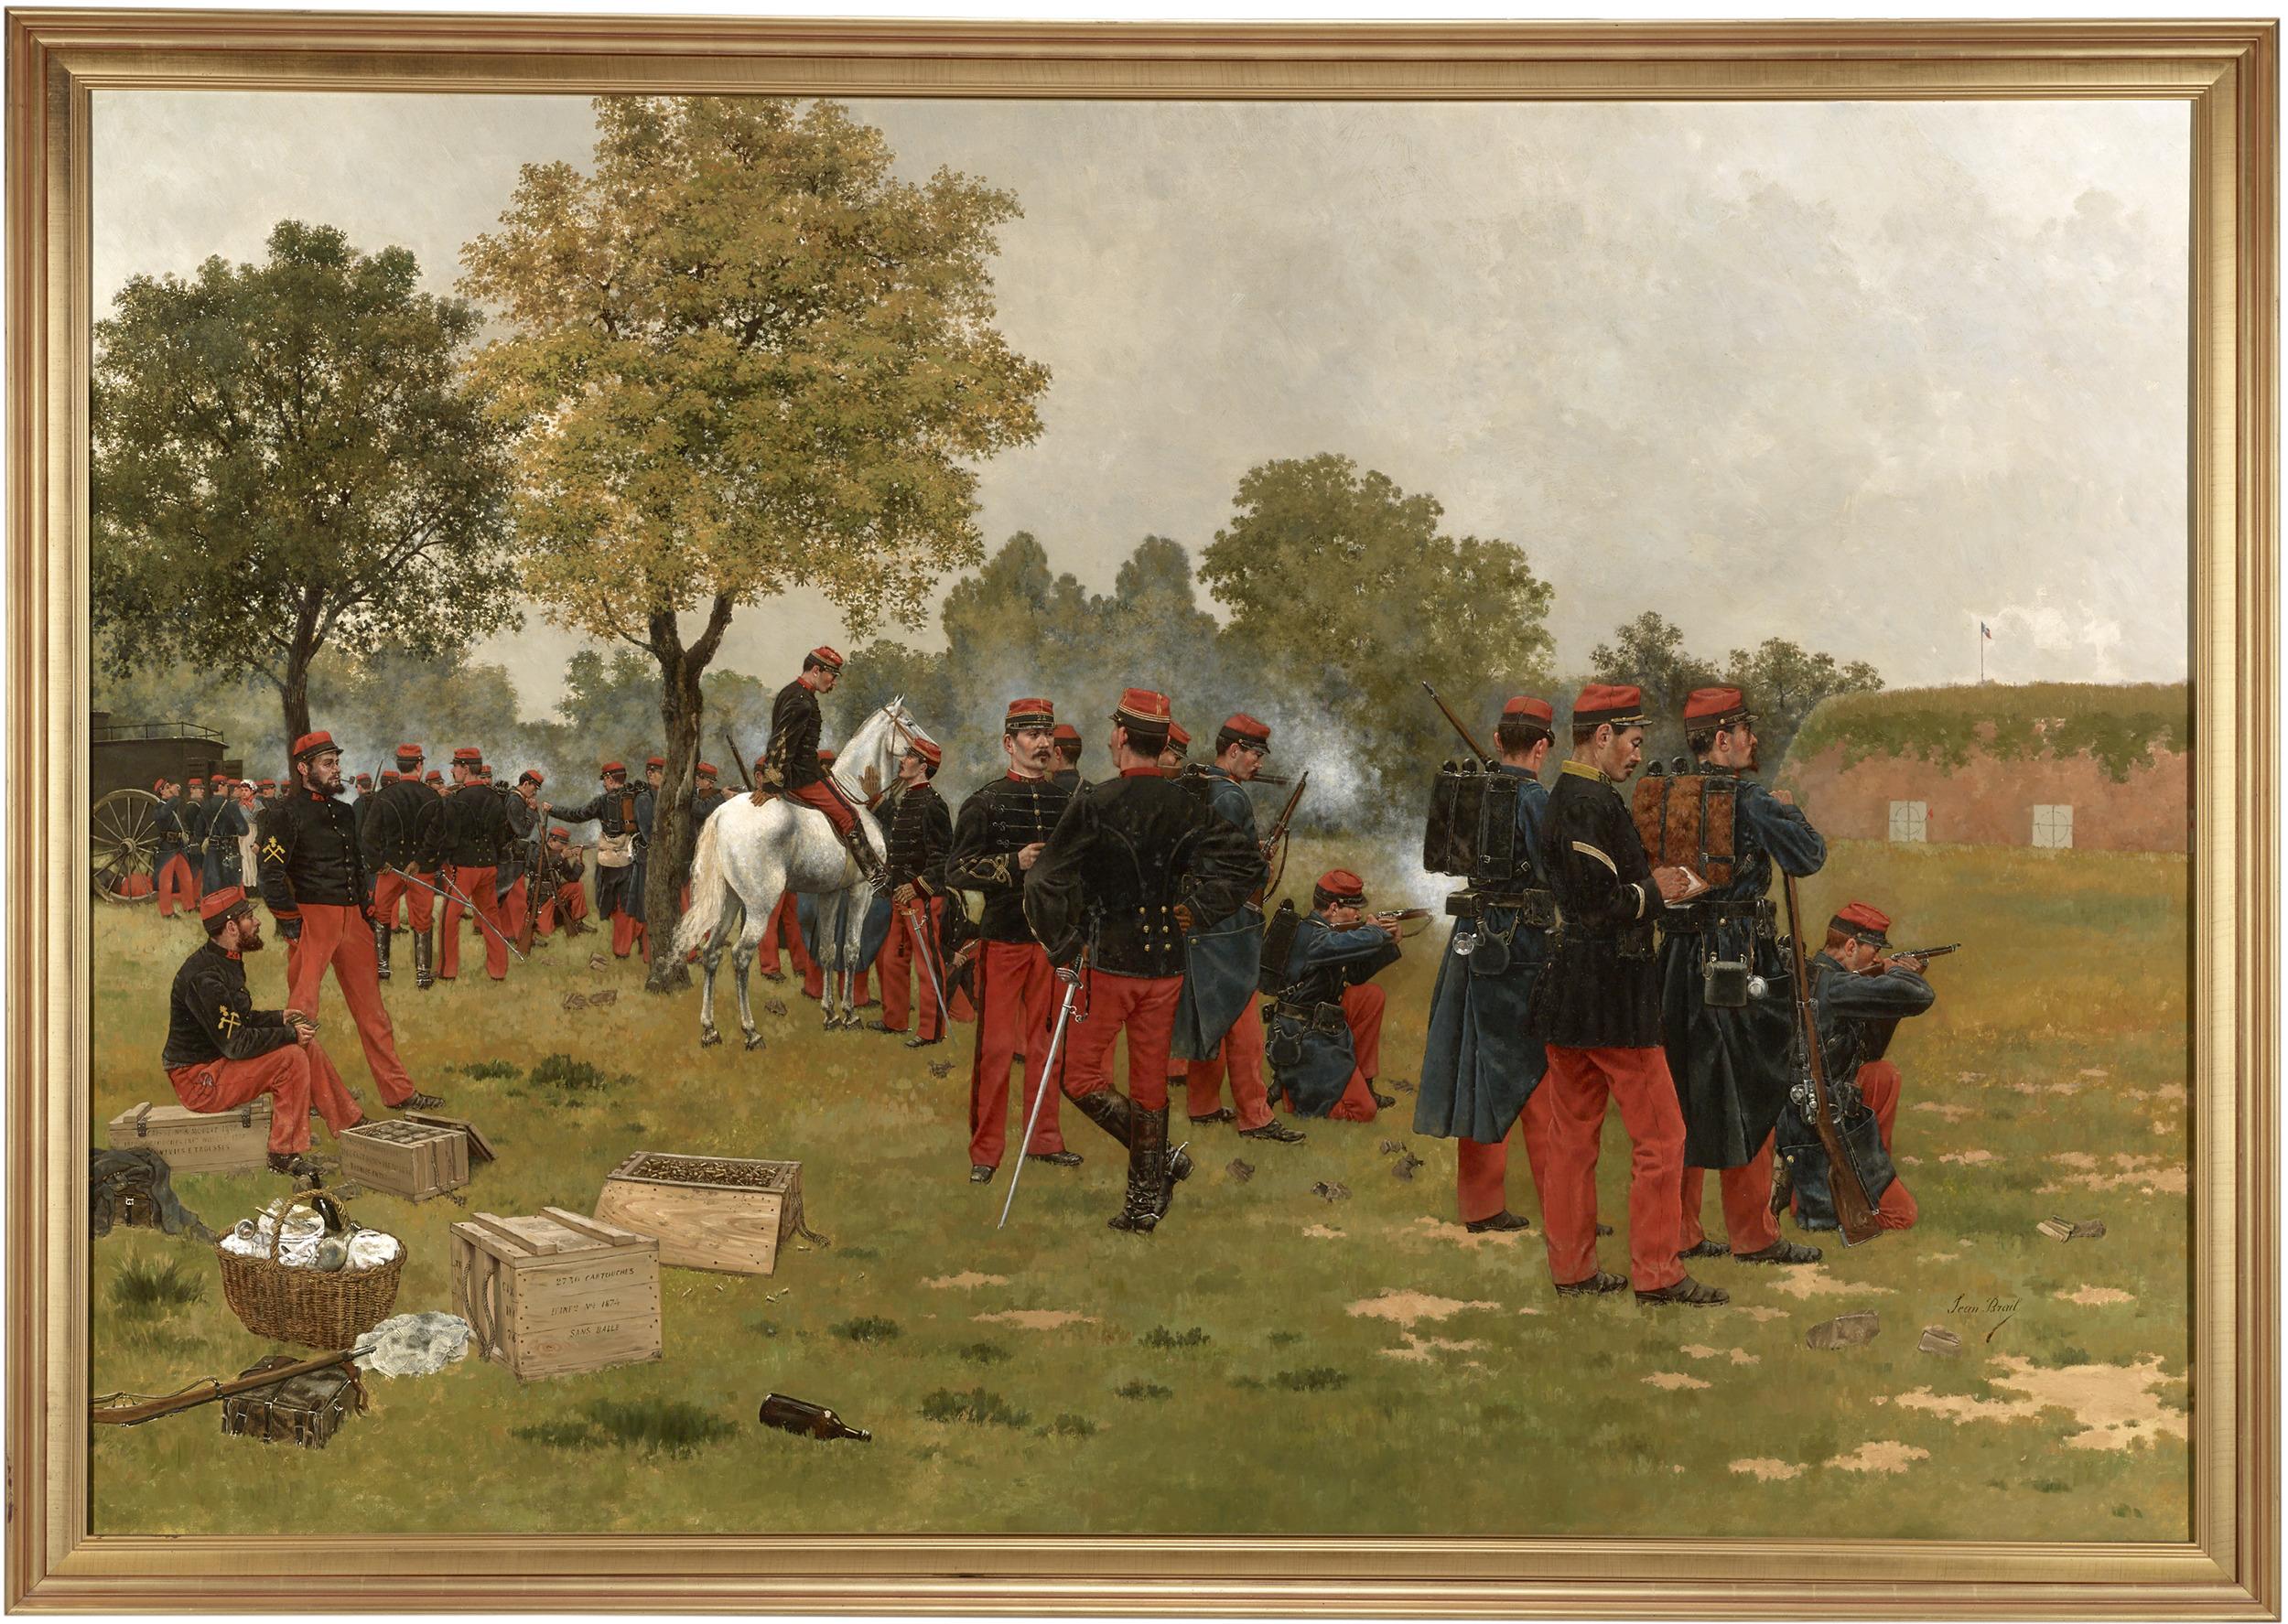 Le tir a la cible (Target Shooting) - Painting by Achille Jean Théodore Brail